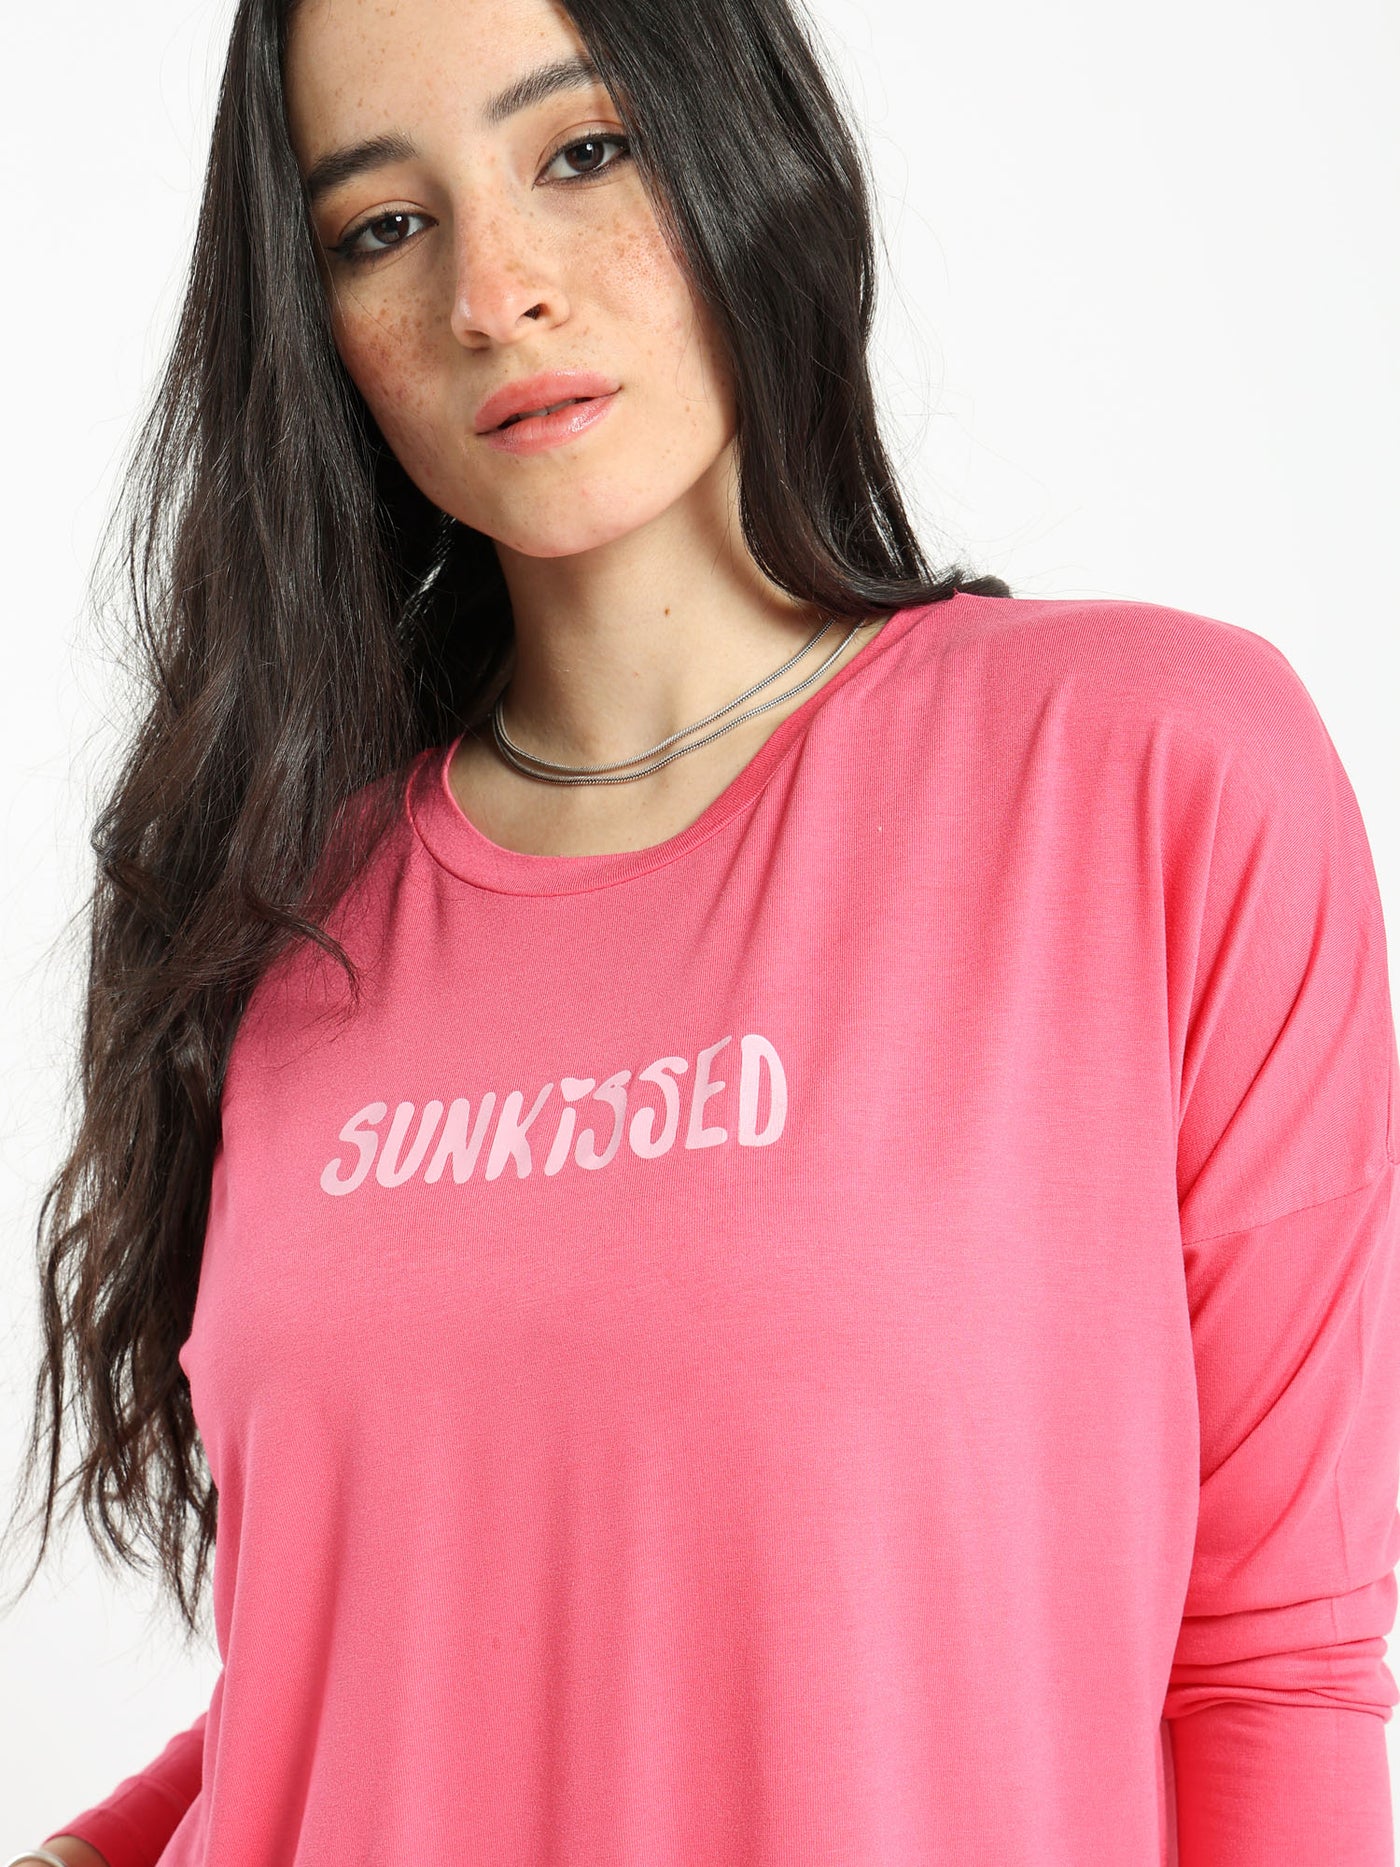 T-Shirt - "Sunkissed" Front Print - High Low